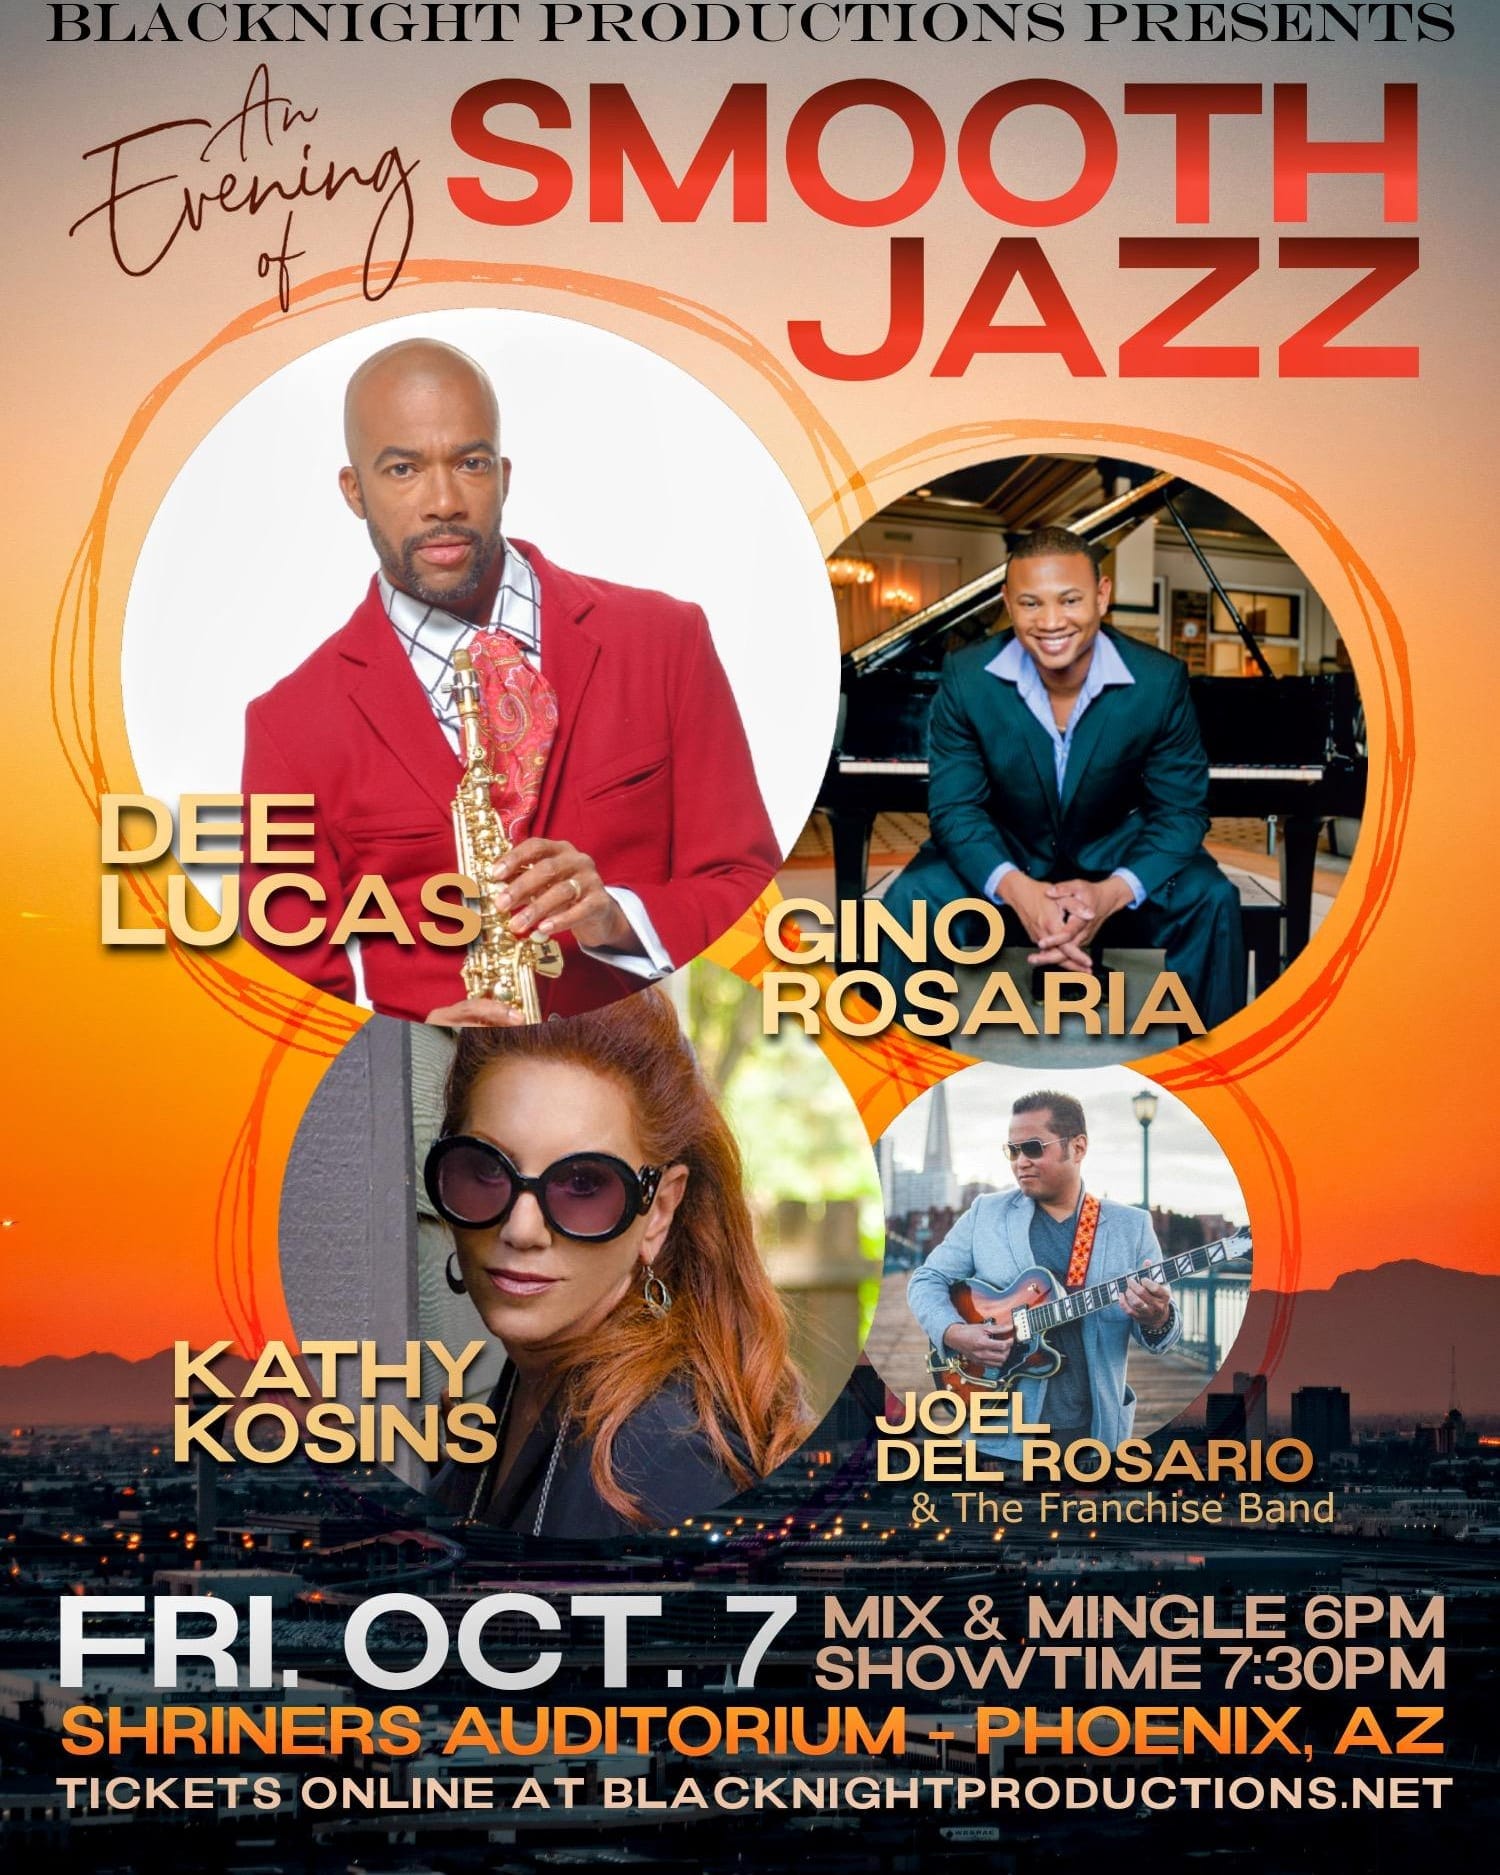 An Evening of Smooth Jazz in Phoenix with Dee Lucas, Gino Rosaria, Kathy Kosins, Joel Del Rosario with The Franchise Band on October 7